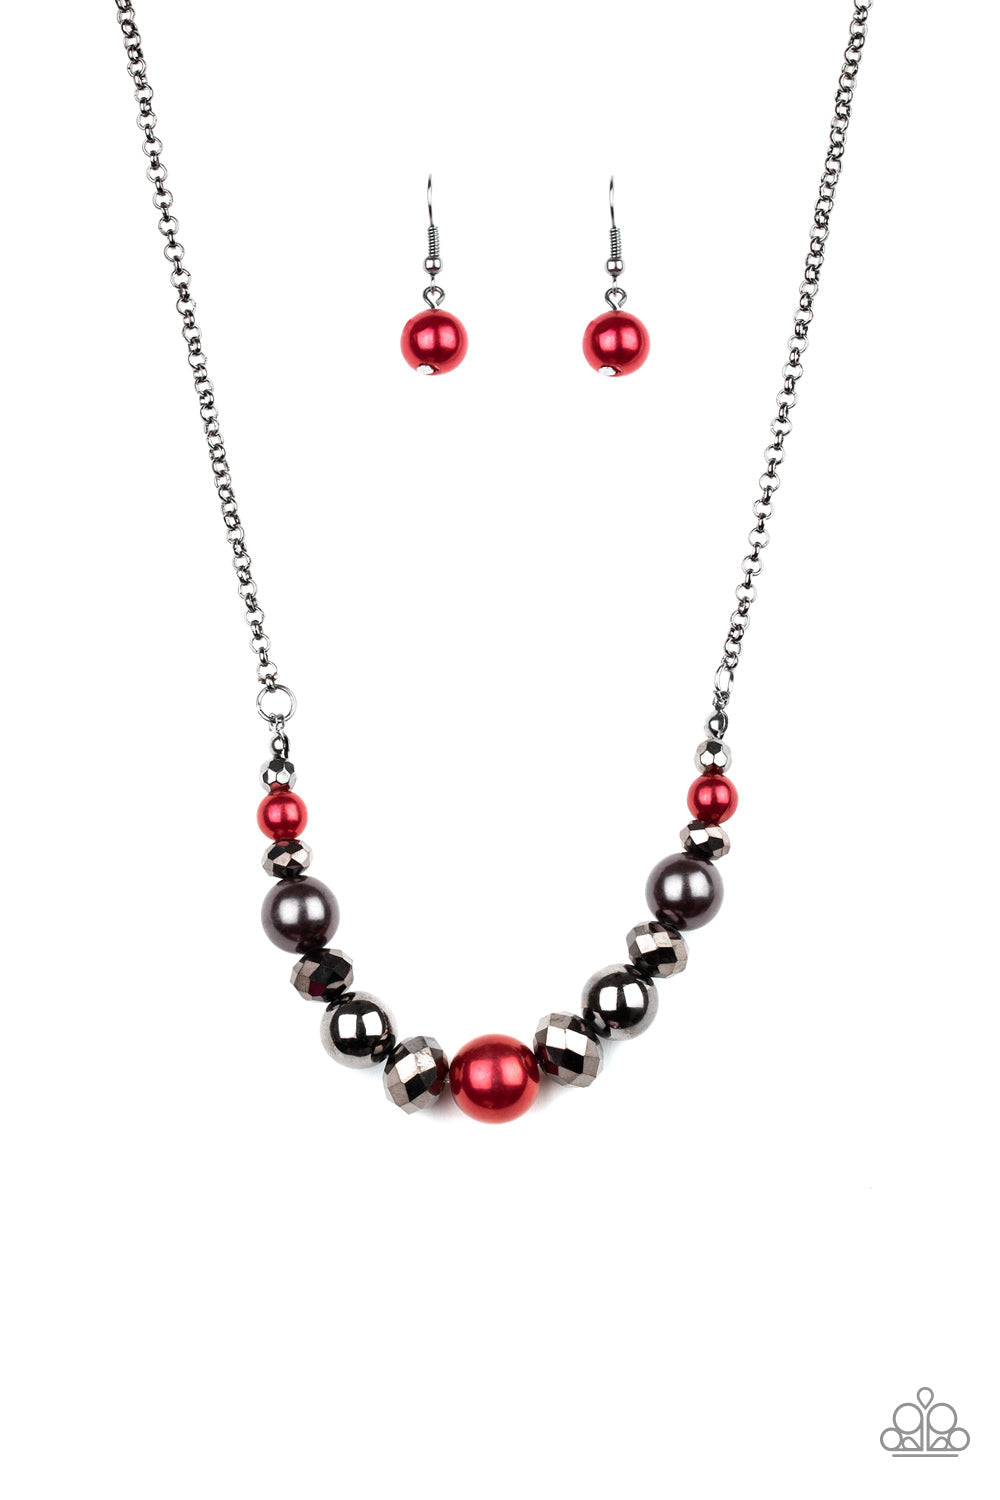 The Big-Leaguer - Red and Black Gunmetal Necklace - Paparazzi Accessories - A collection of pearly red, classic gunmetal, and crystal-like hematite beads are threaded along an invisible wire below the collar for a glamorous look. Features an adjustable clasp closure. Sold as one individual necklace.